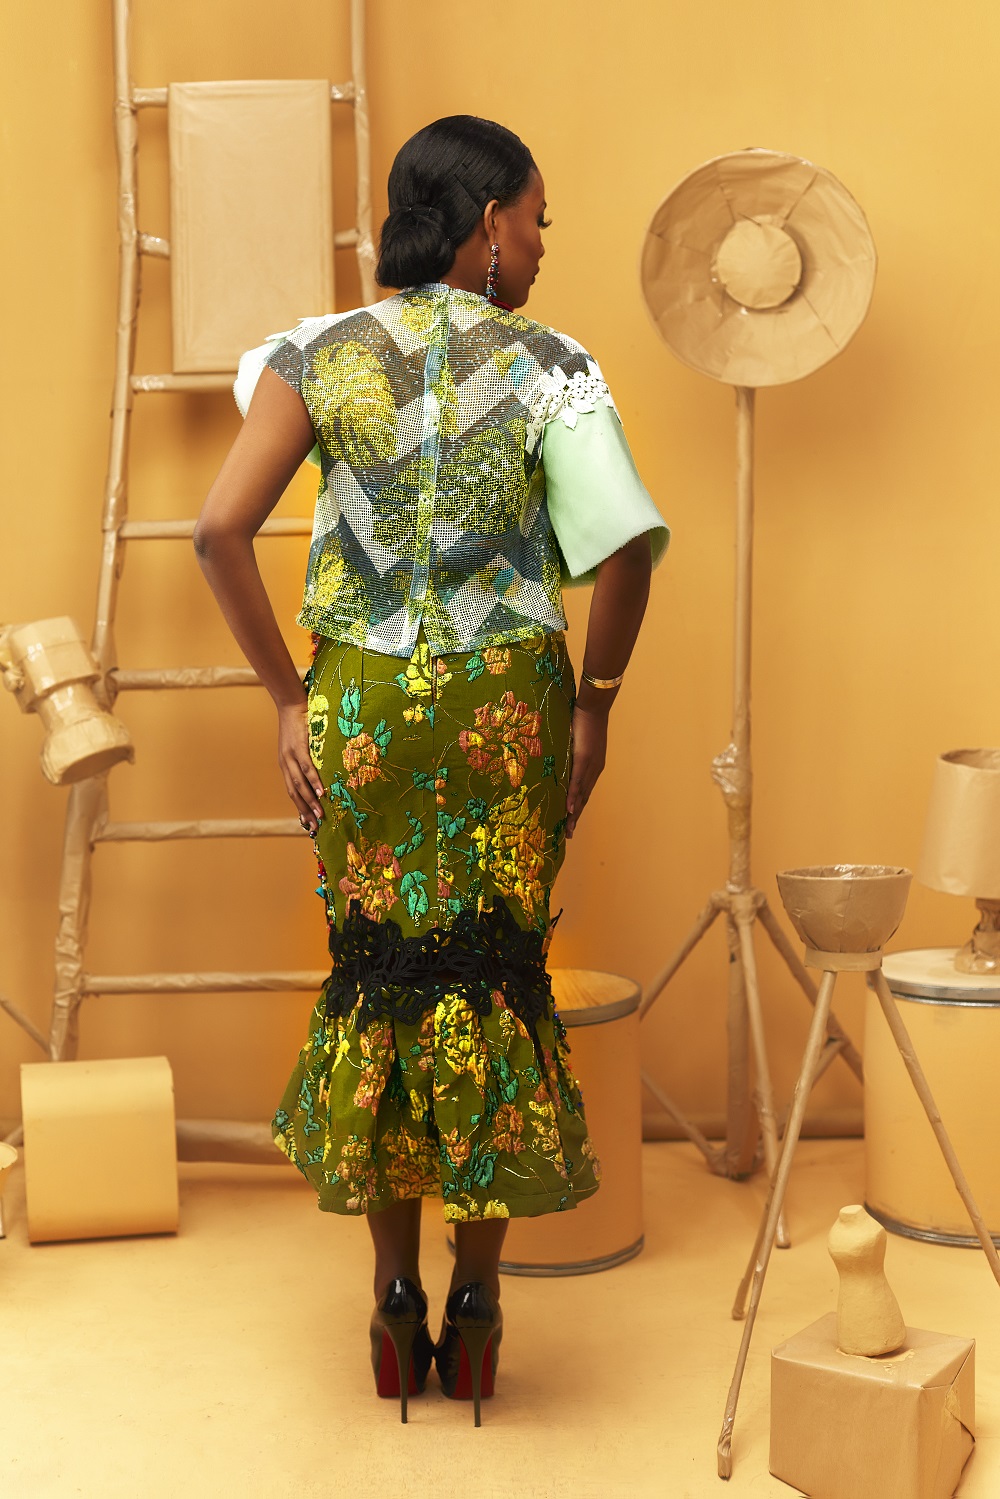 PistisGh's Ready-to-Wear Collection is Here... And it's Everything We ...